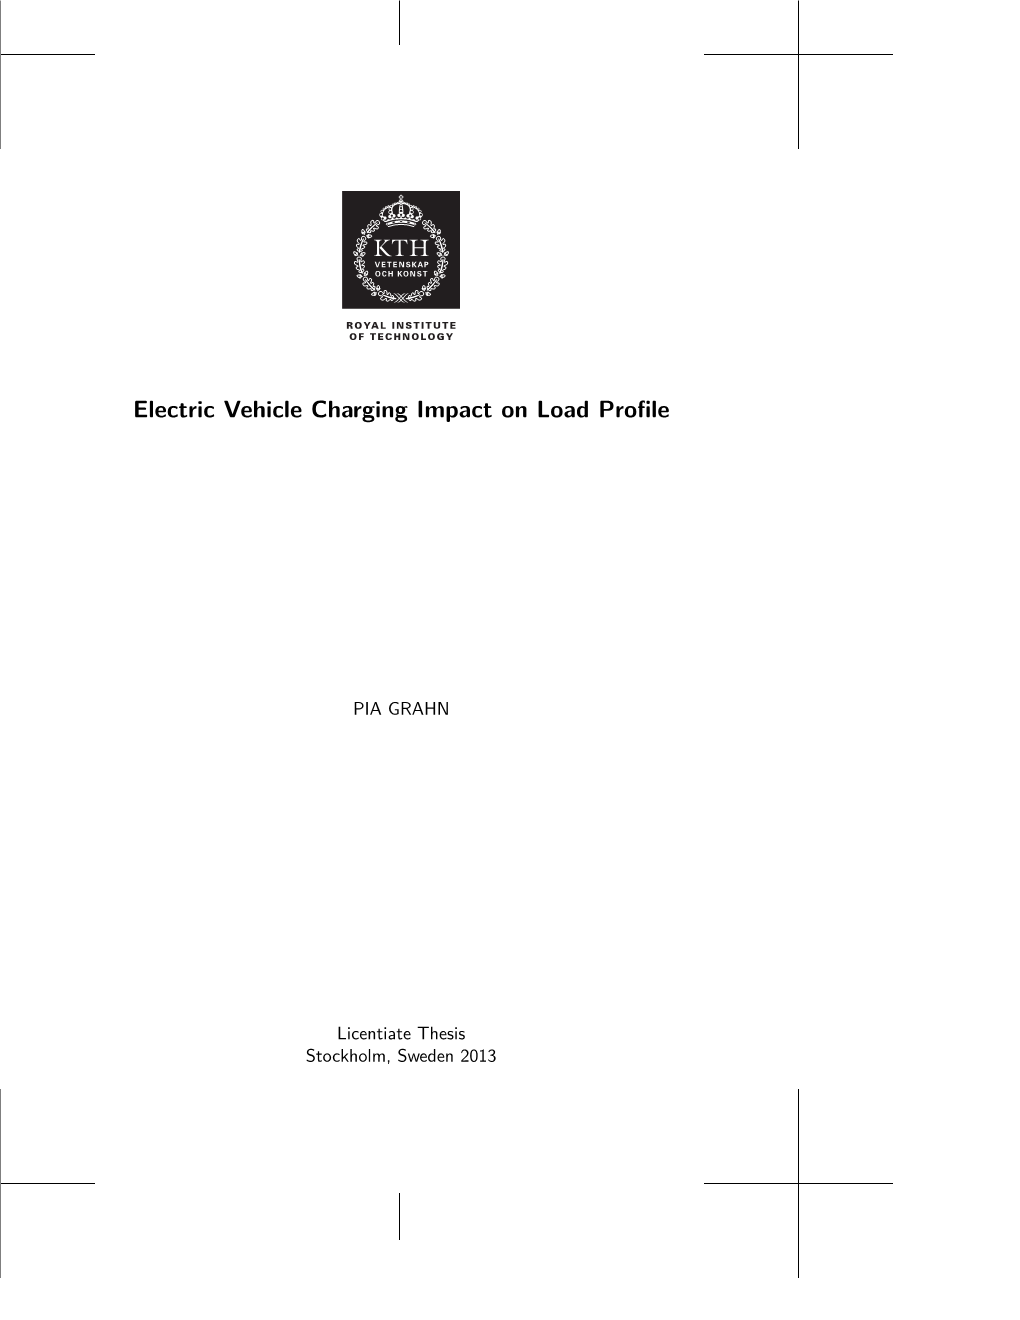 Electric Vehicle Charging Impact on Load Profile